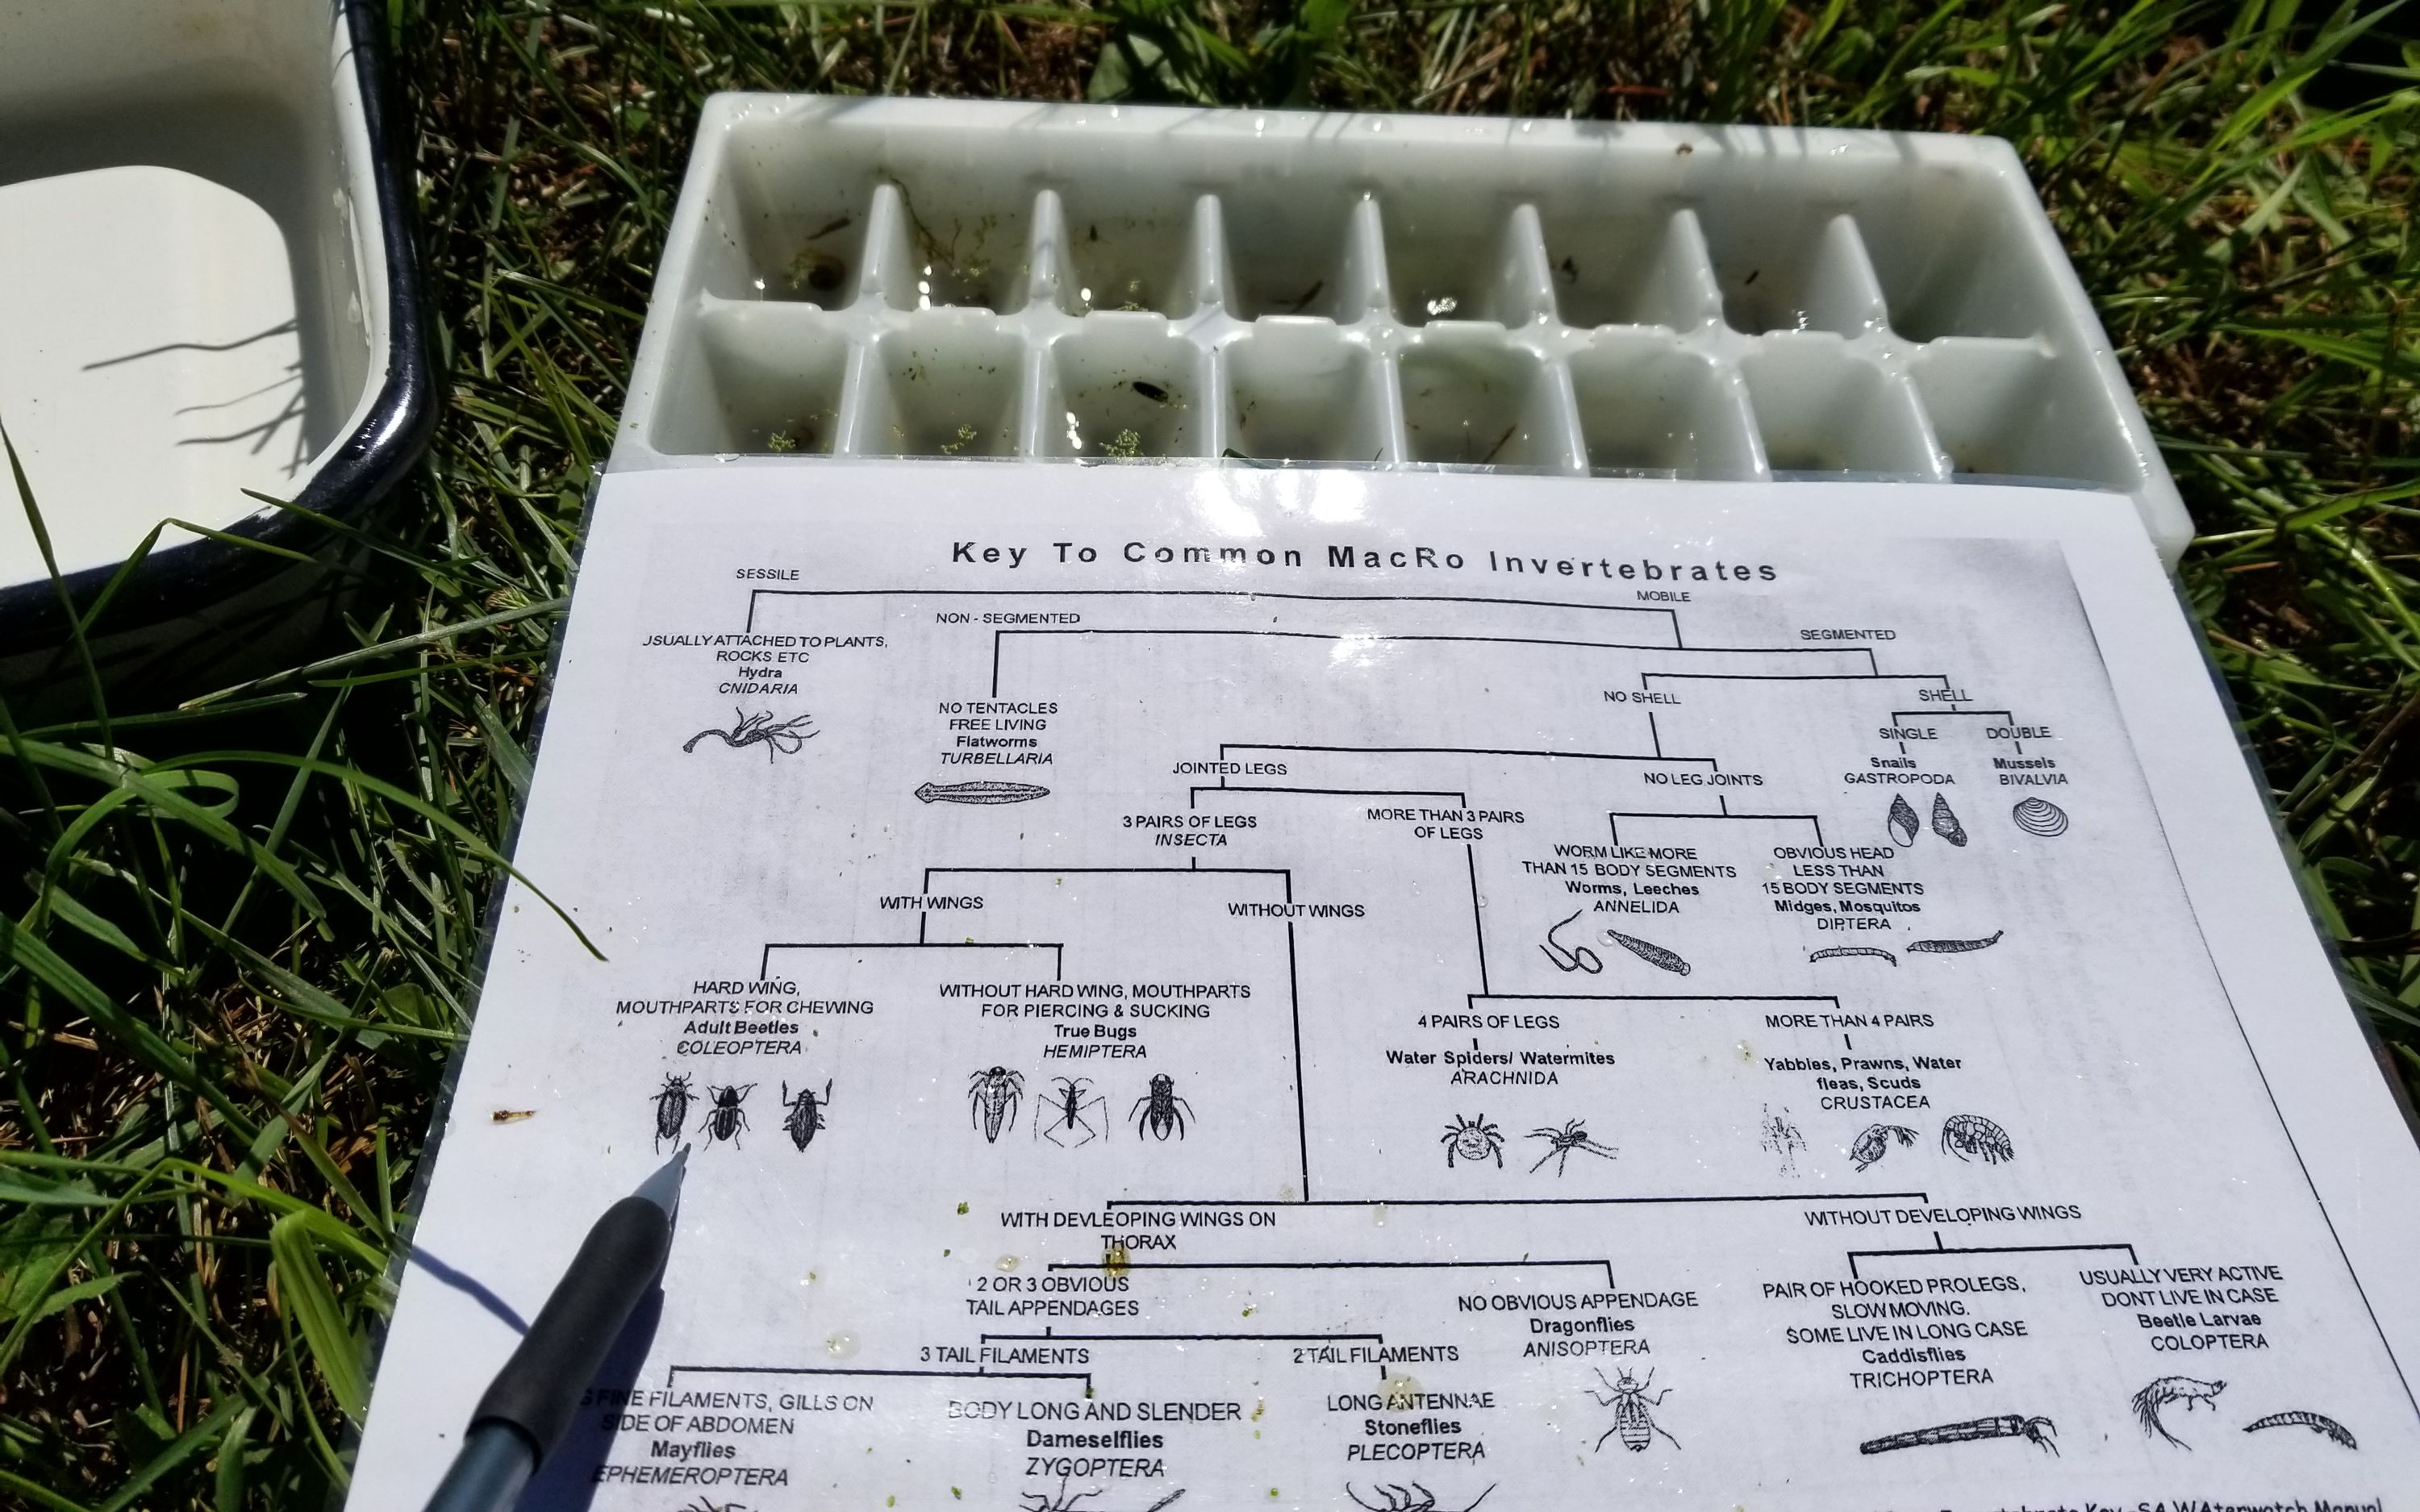 Worksheet for sorting different invertebrates into trays to gain a sense of the diversity in one of the ponds in Lux Arbor